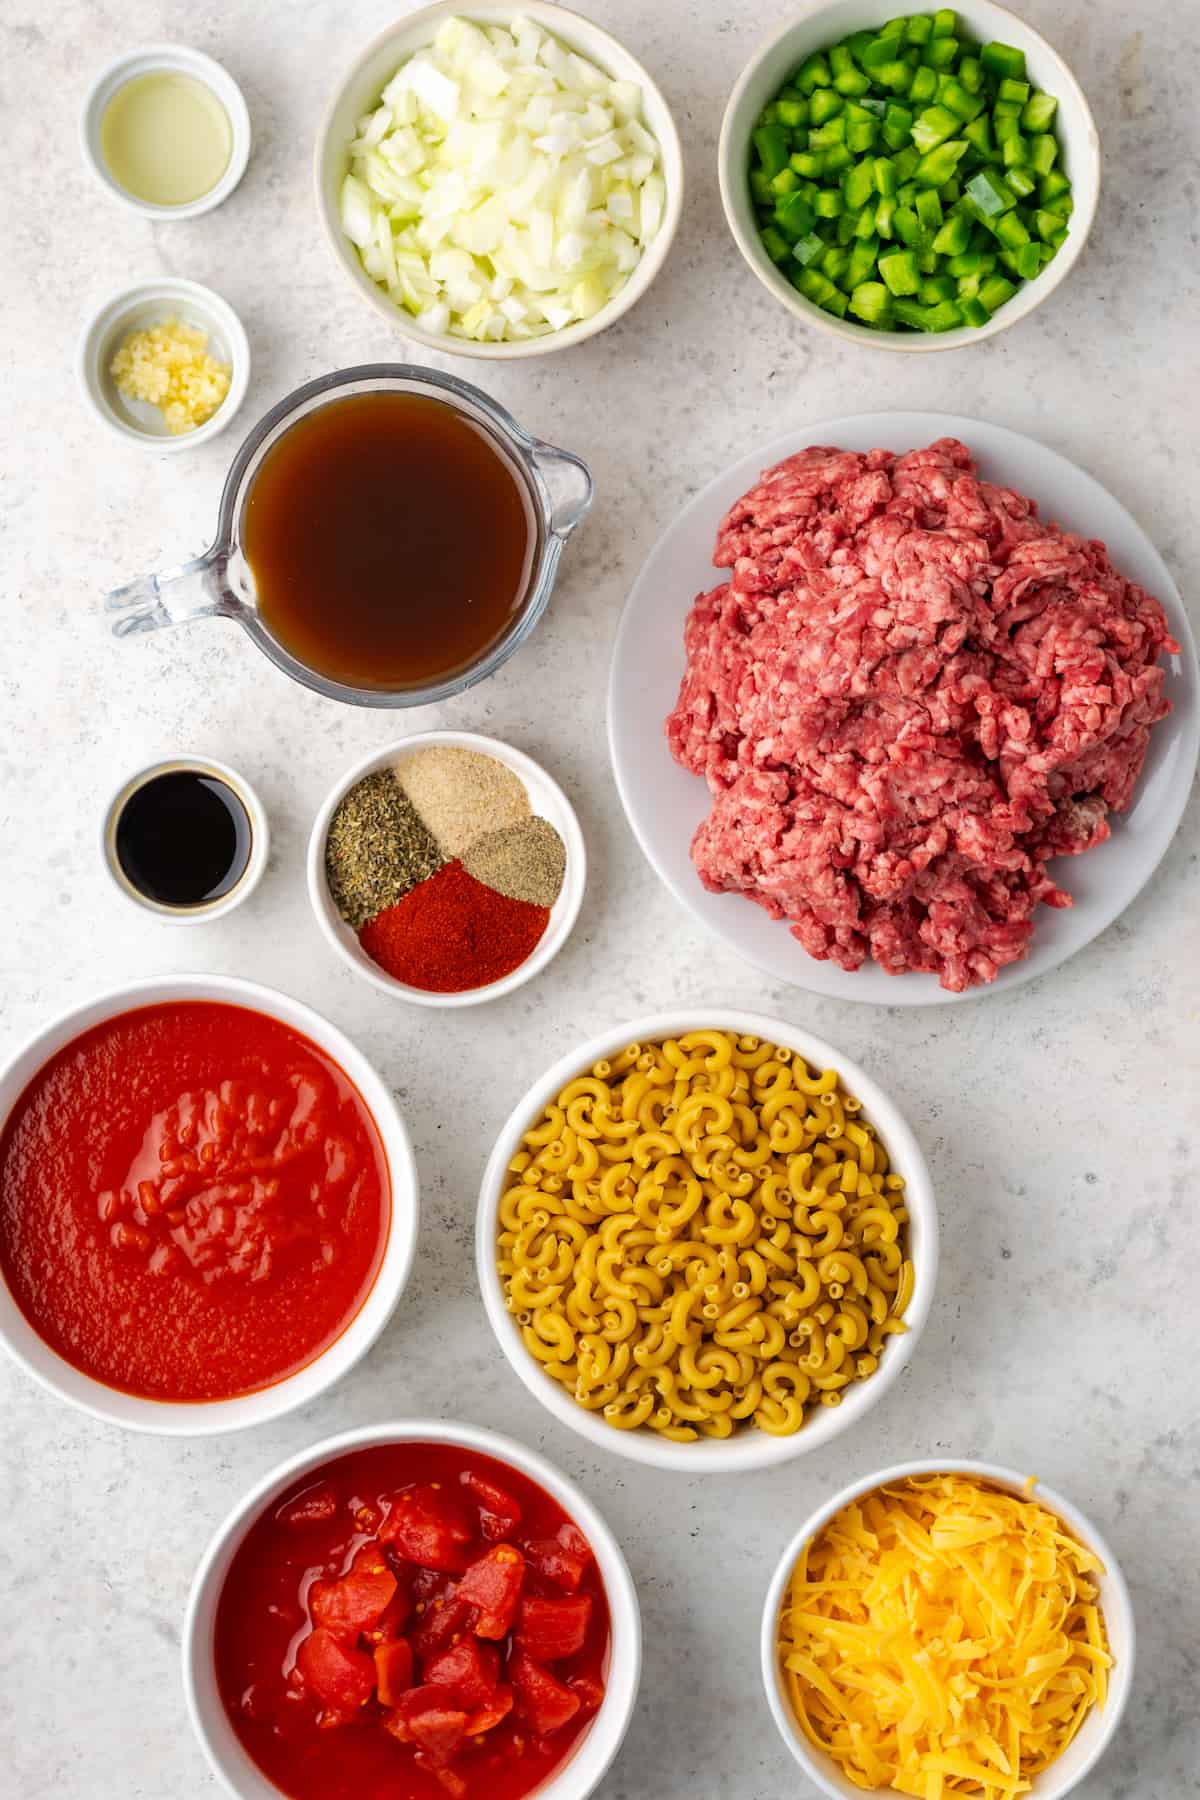 Ingredients laid out in separate bowls for making American style goulash.